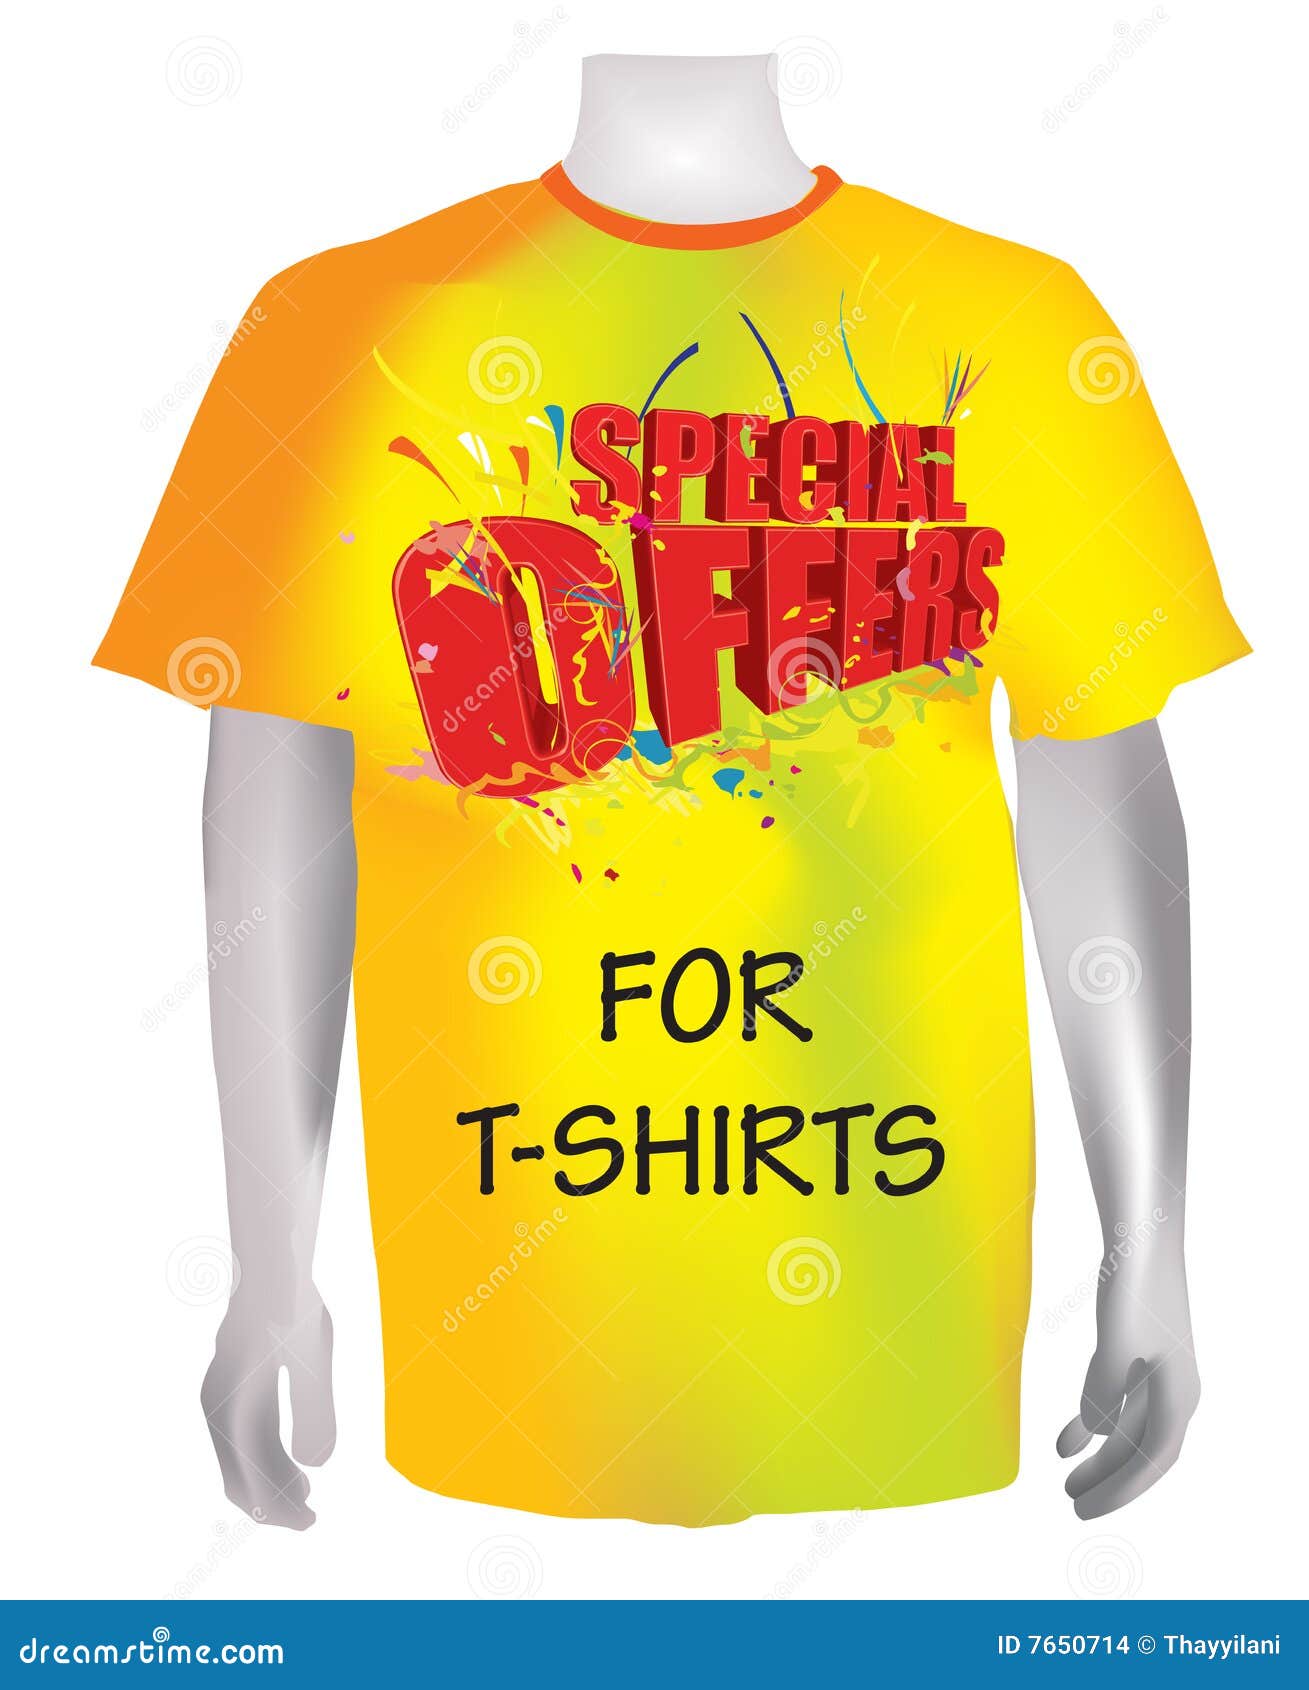 special offers for t-shirts